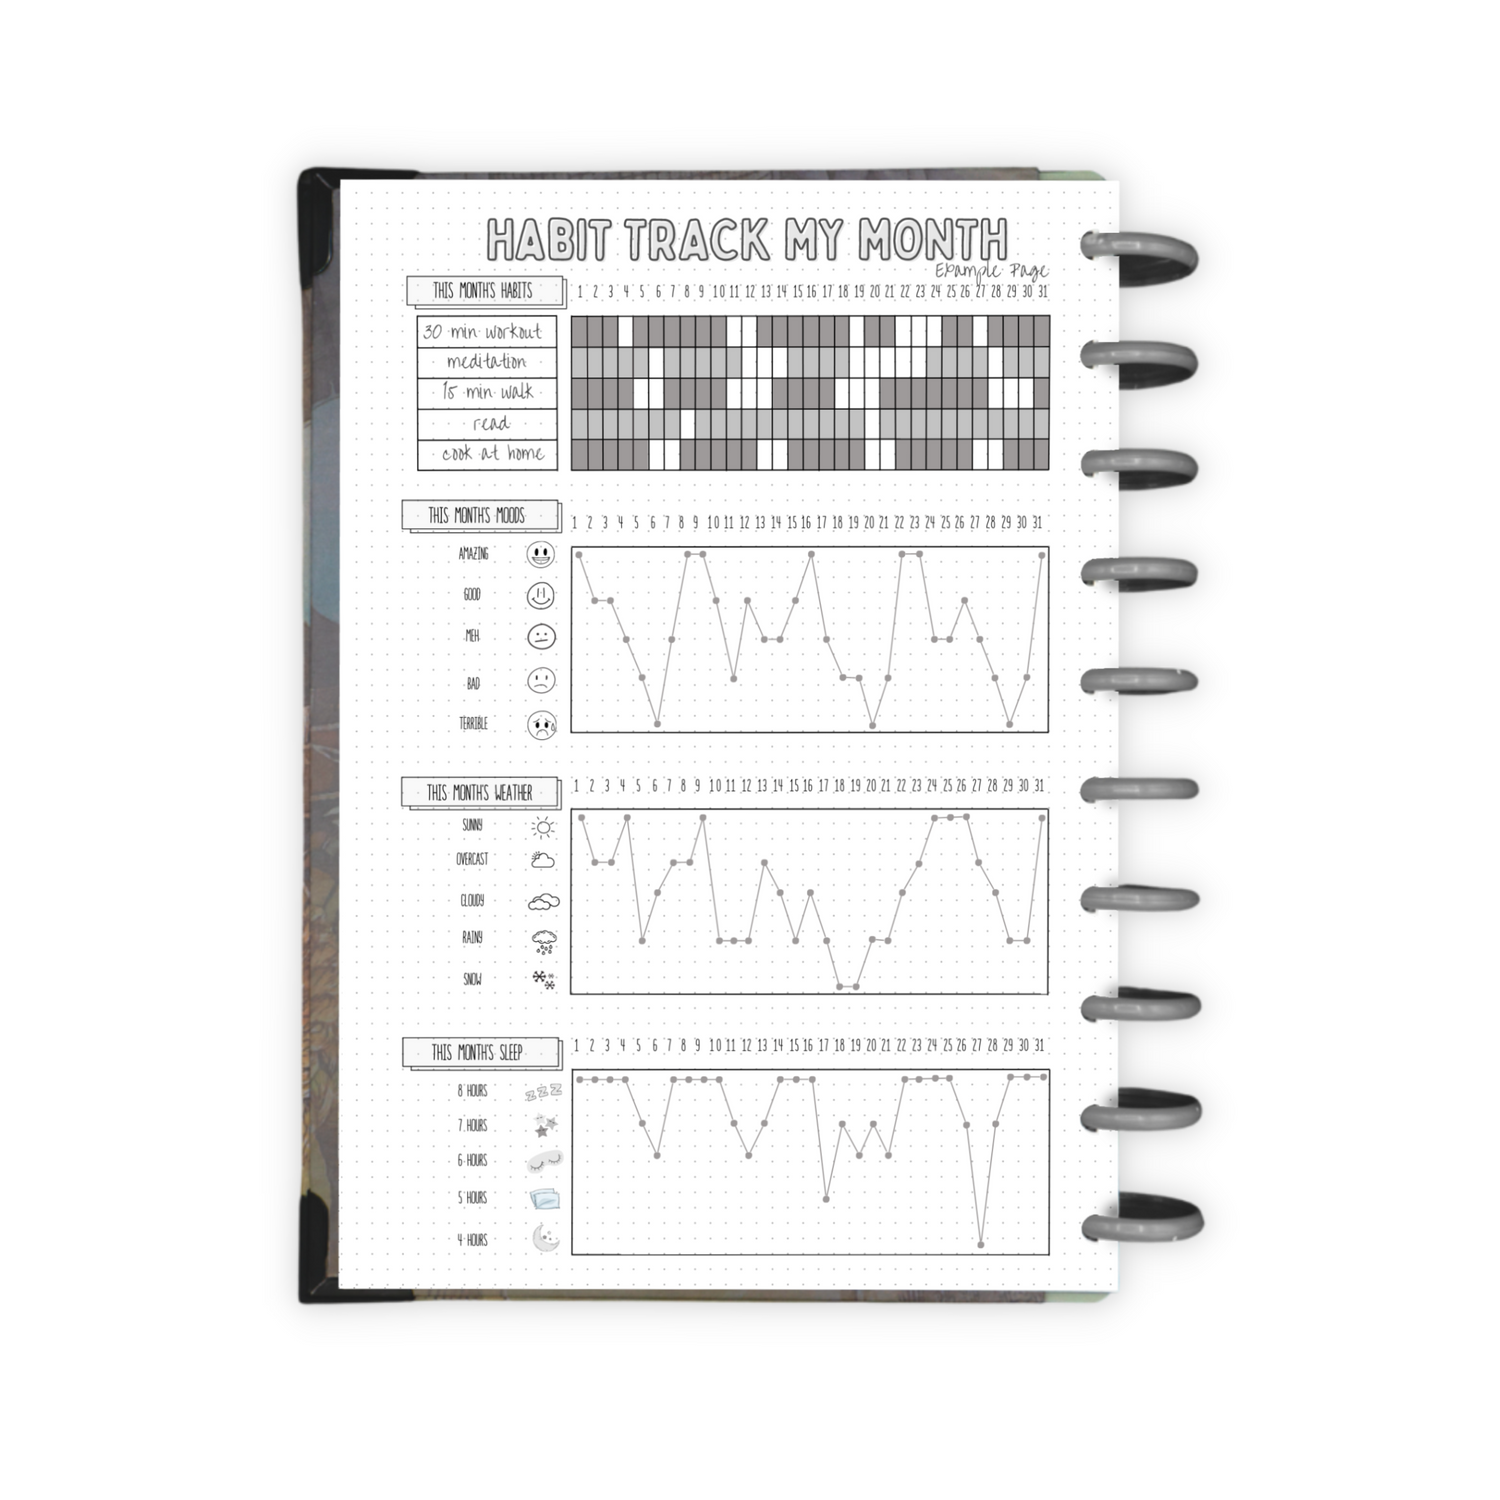 12 Planner Layout Ideas for Monthly Habit Tracking in Your Bullet